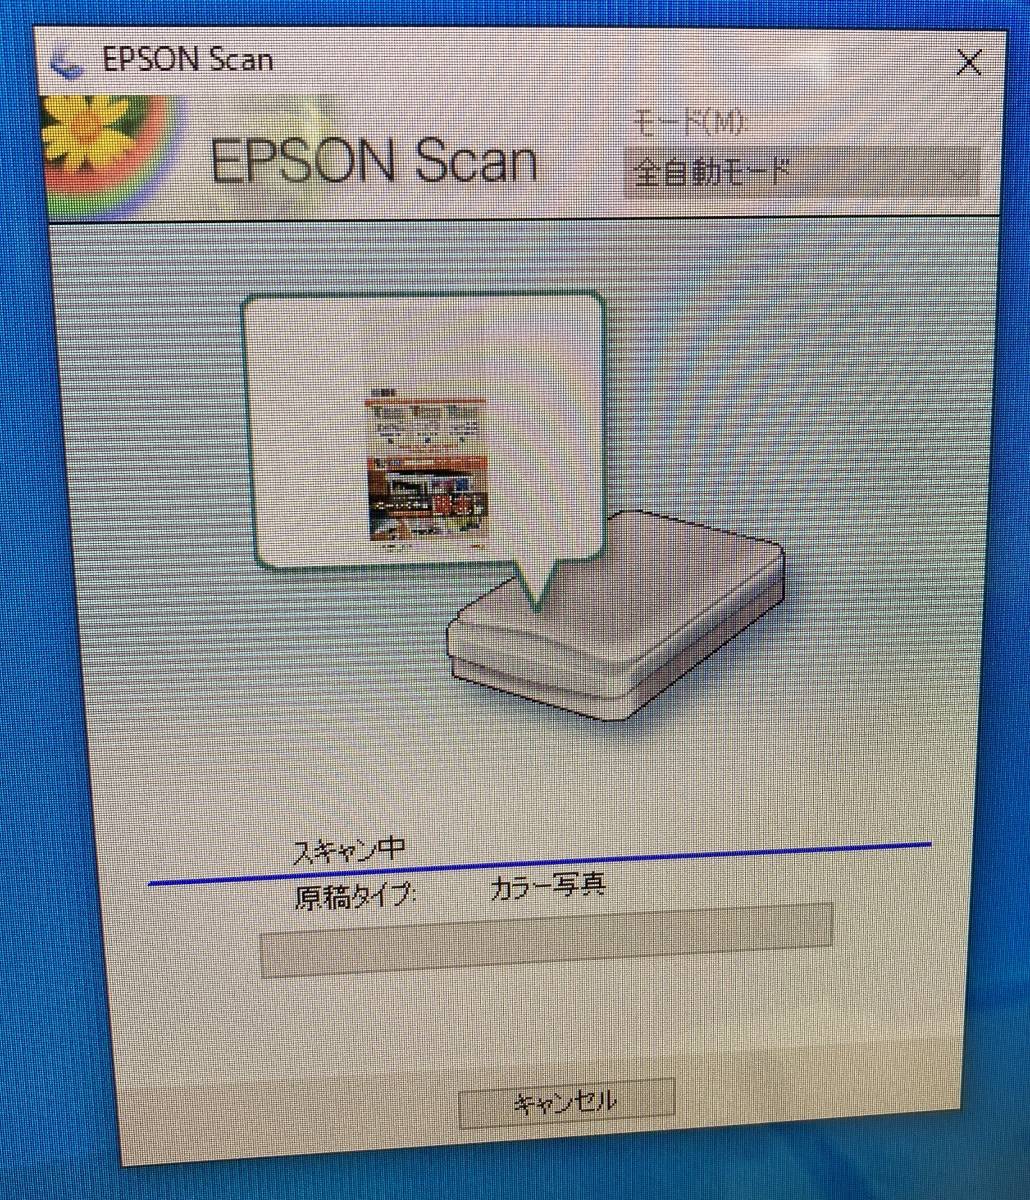 EPSON Epson A4f Lad bed scanner GT-S630 82225 win10 correspondence 